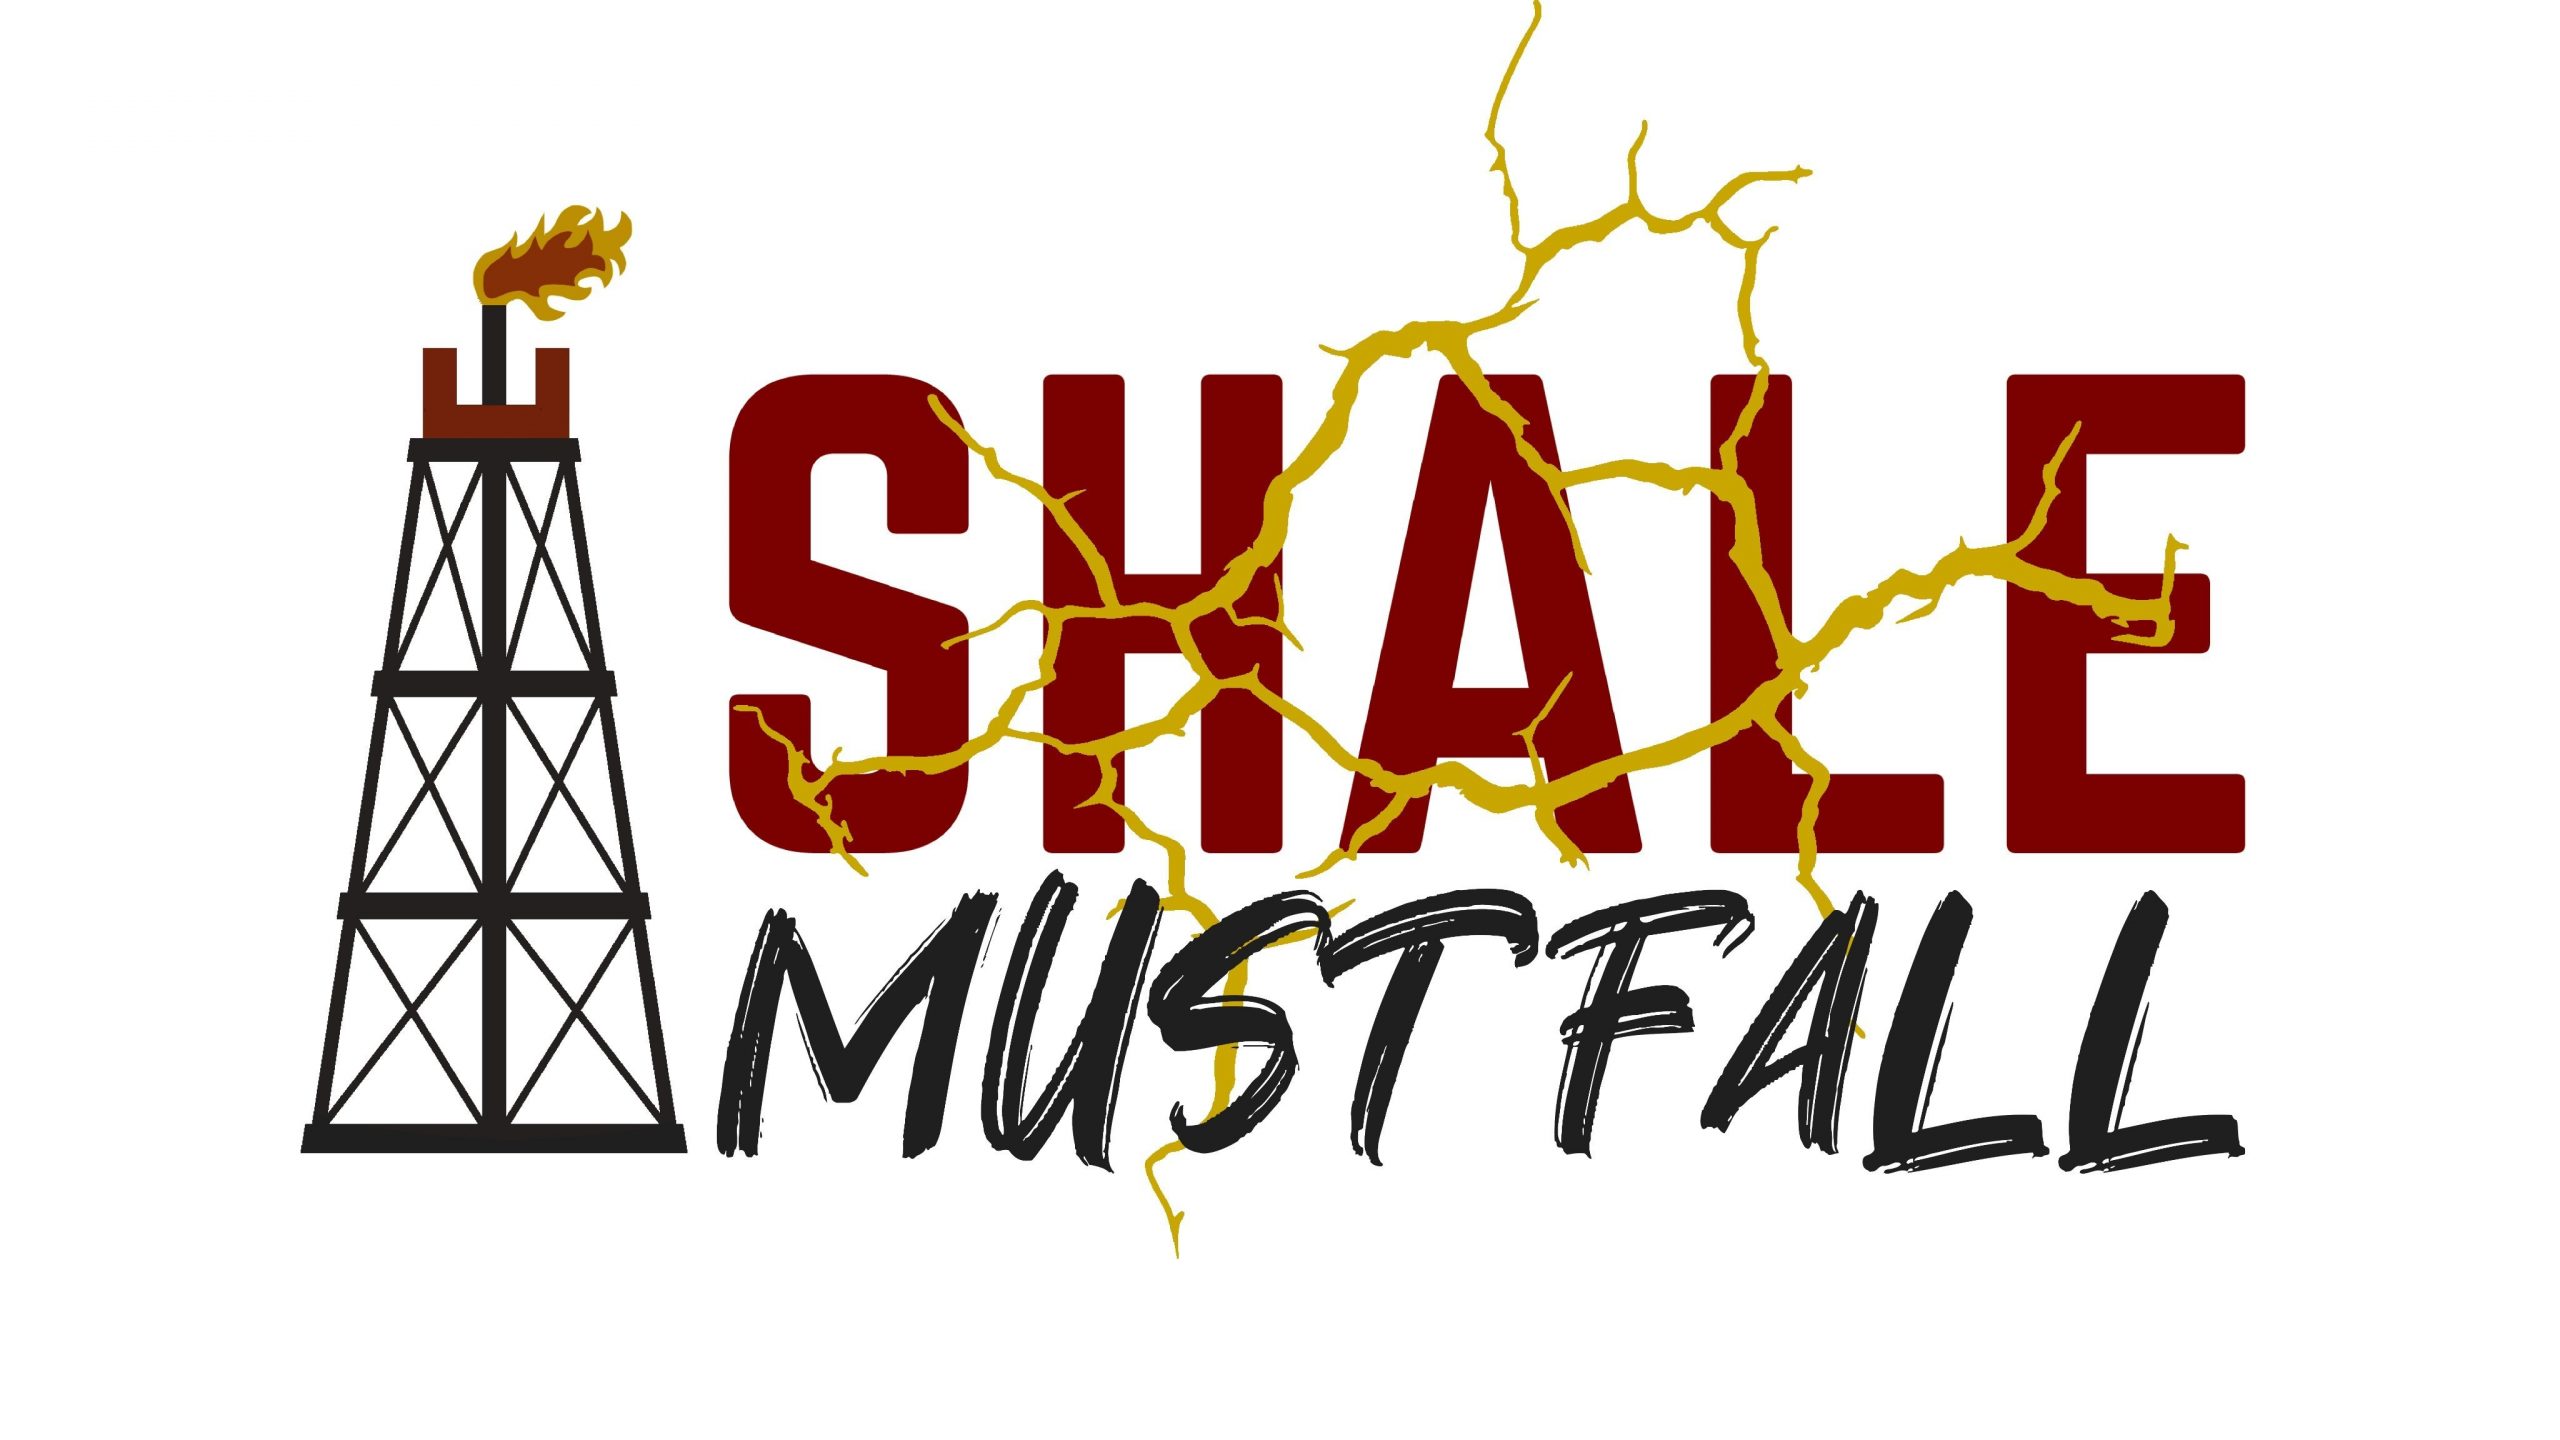 Shale Must Fall: Global Day Of Action Against Fracking